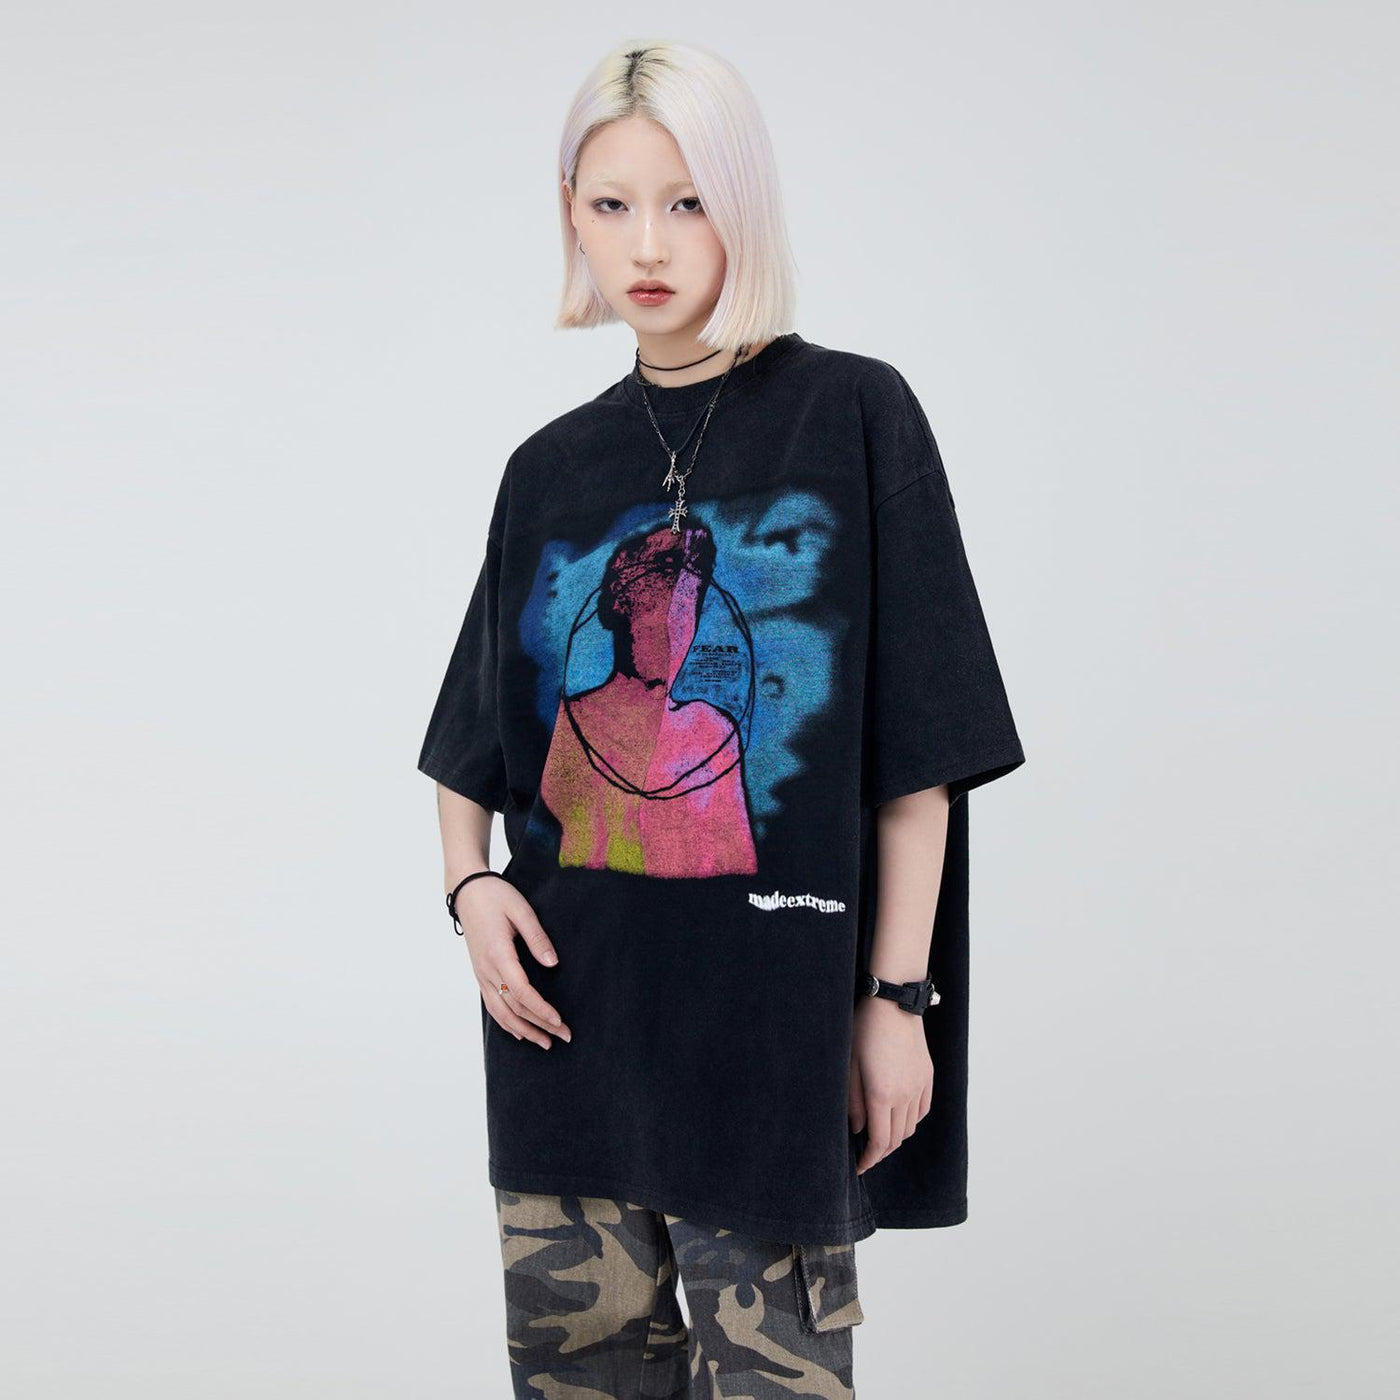 Creative Portrait Graphic T-Shirt Korean Street Fashion T-Shirt By Made Extreme Shop Online at OH Vault